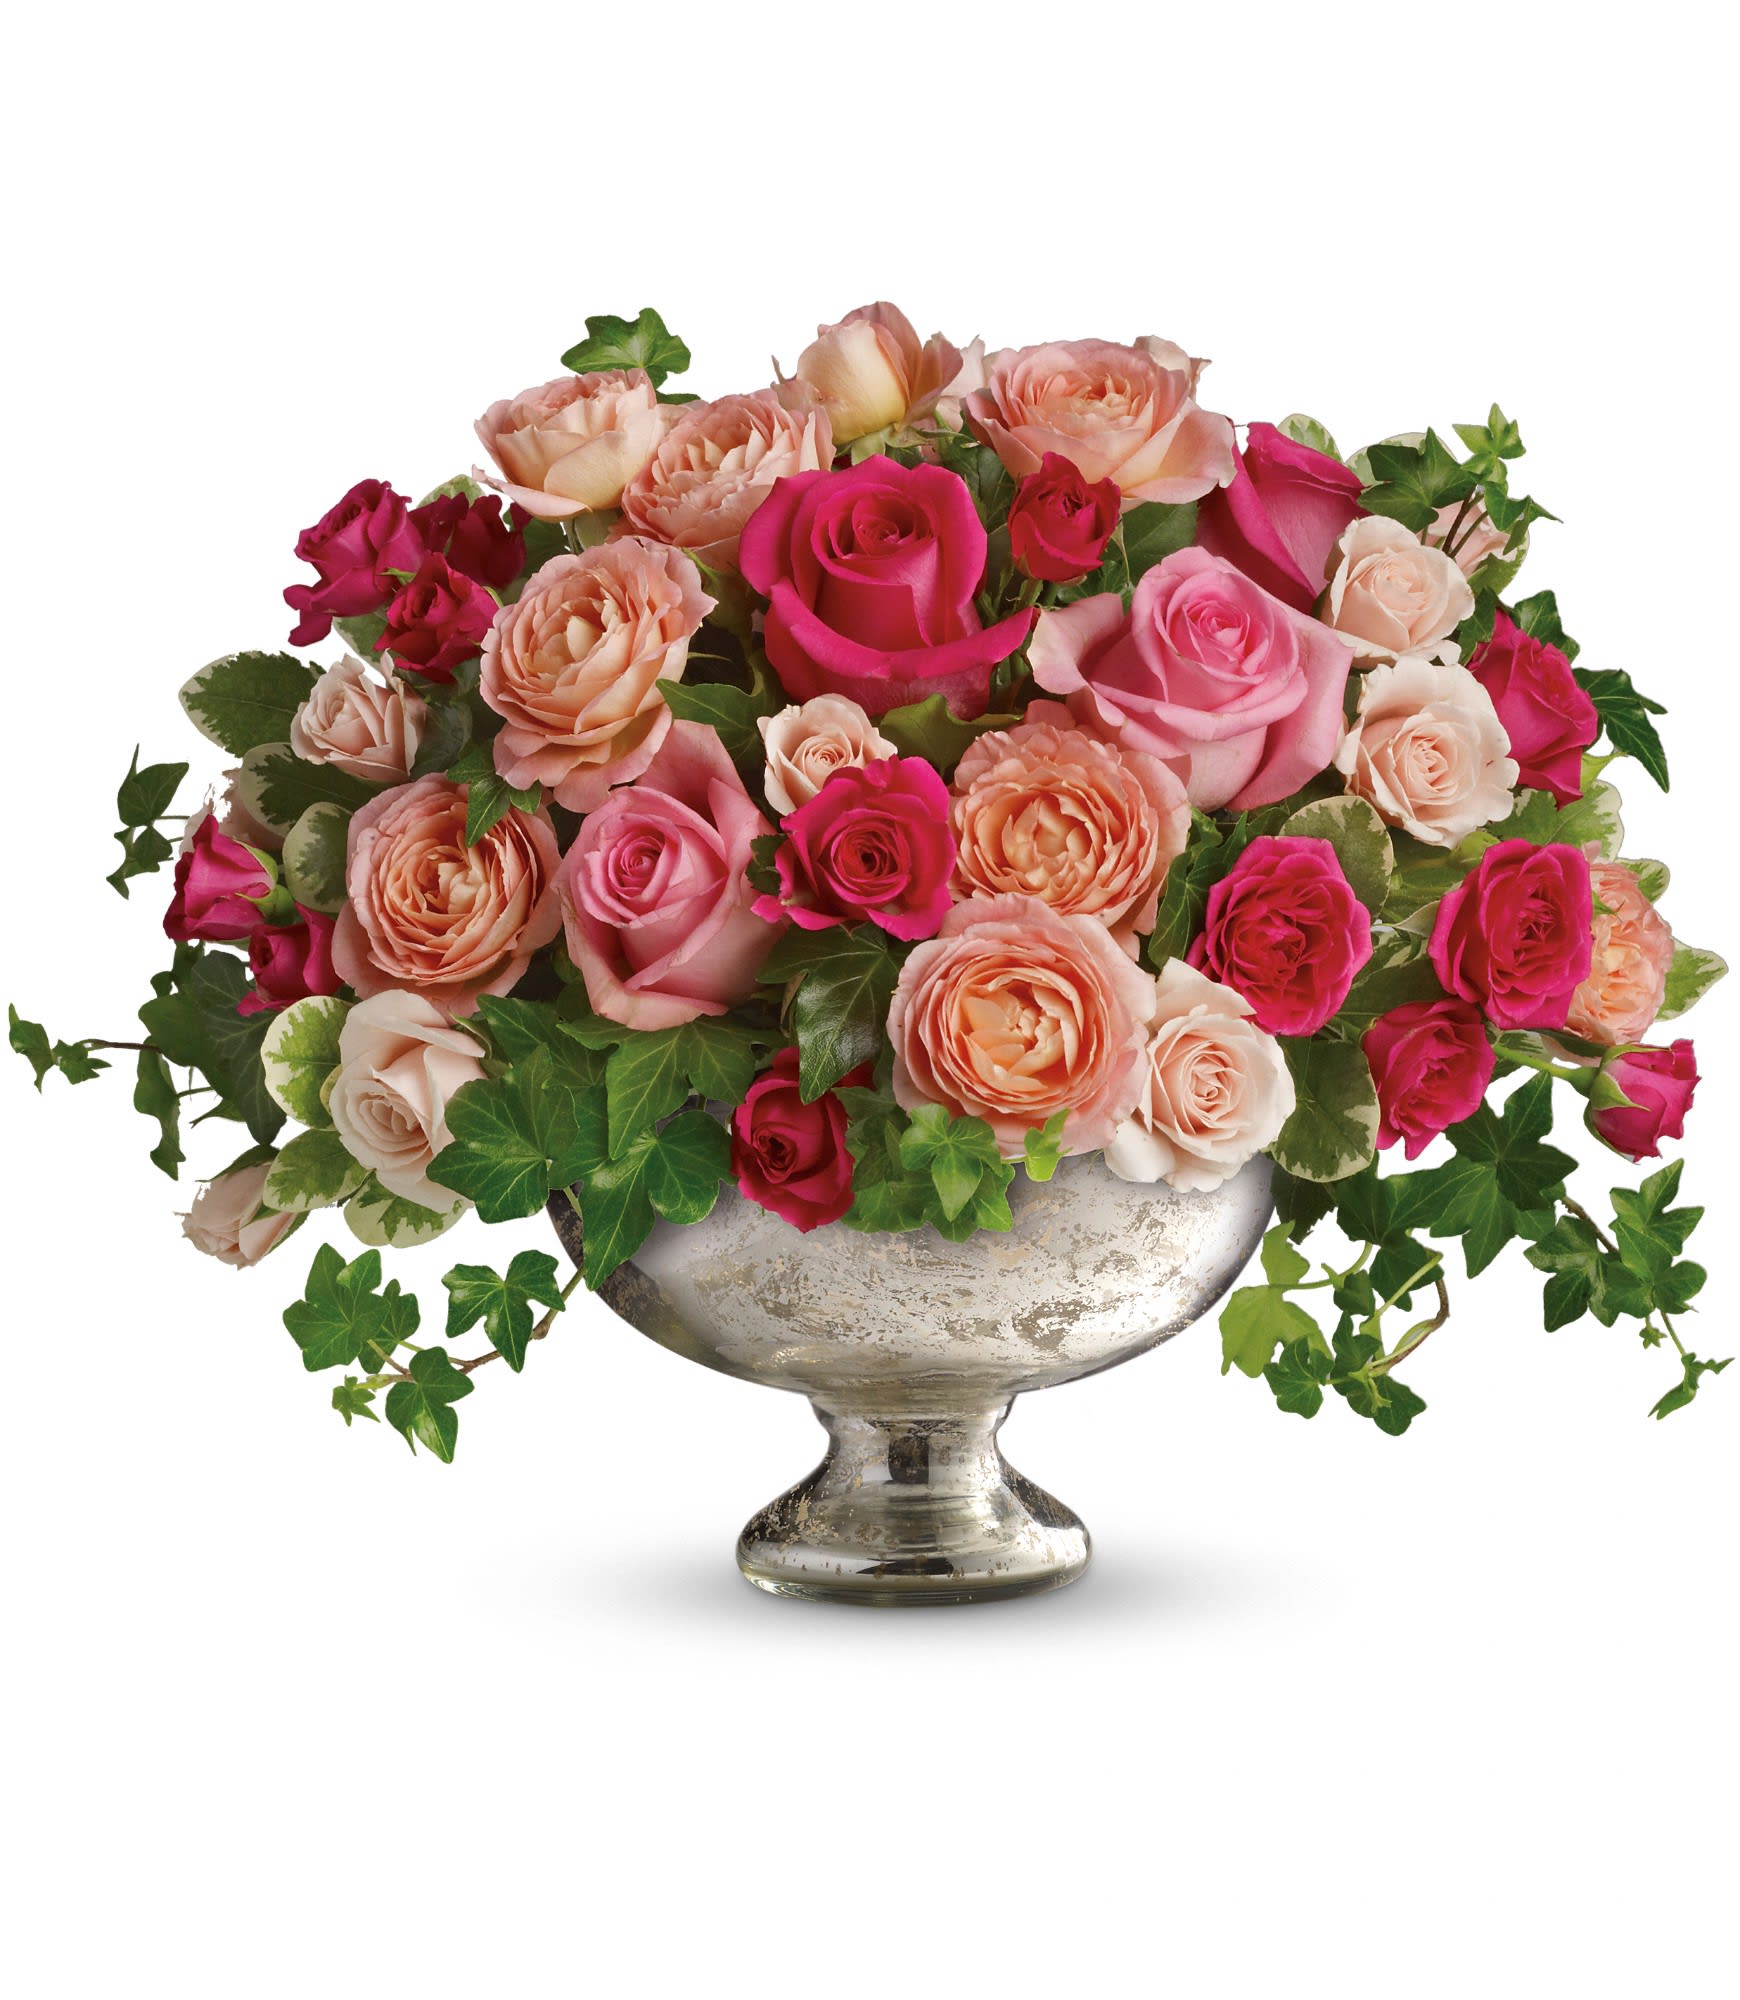 Queen's Court by Teleflora  - When you really want to make a grand impression on someone special, choose this regal arrangement. Roses, in every possible shade of pink, are so beautifully arranged in an exclusive silver Mercury Glass Bowl, there's no doubt you'll be treated like royalty when you send it!    Light, medium and hot pink roses and spray roses are hand-arranged with greens in a gorgeous Mercury Glass Bowl. It's perfectly majestic!    Approximately 16&quot; W x 11&quot; H    Orientation: All-Around        As Shown : T63-1A      Deluxe : T63-1B      Premium : T63-1C  